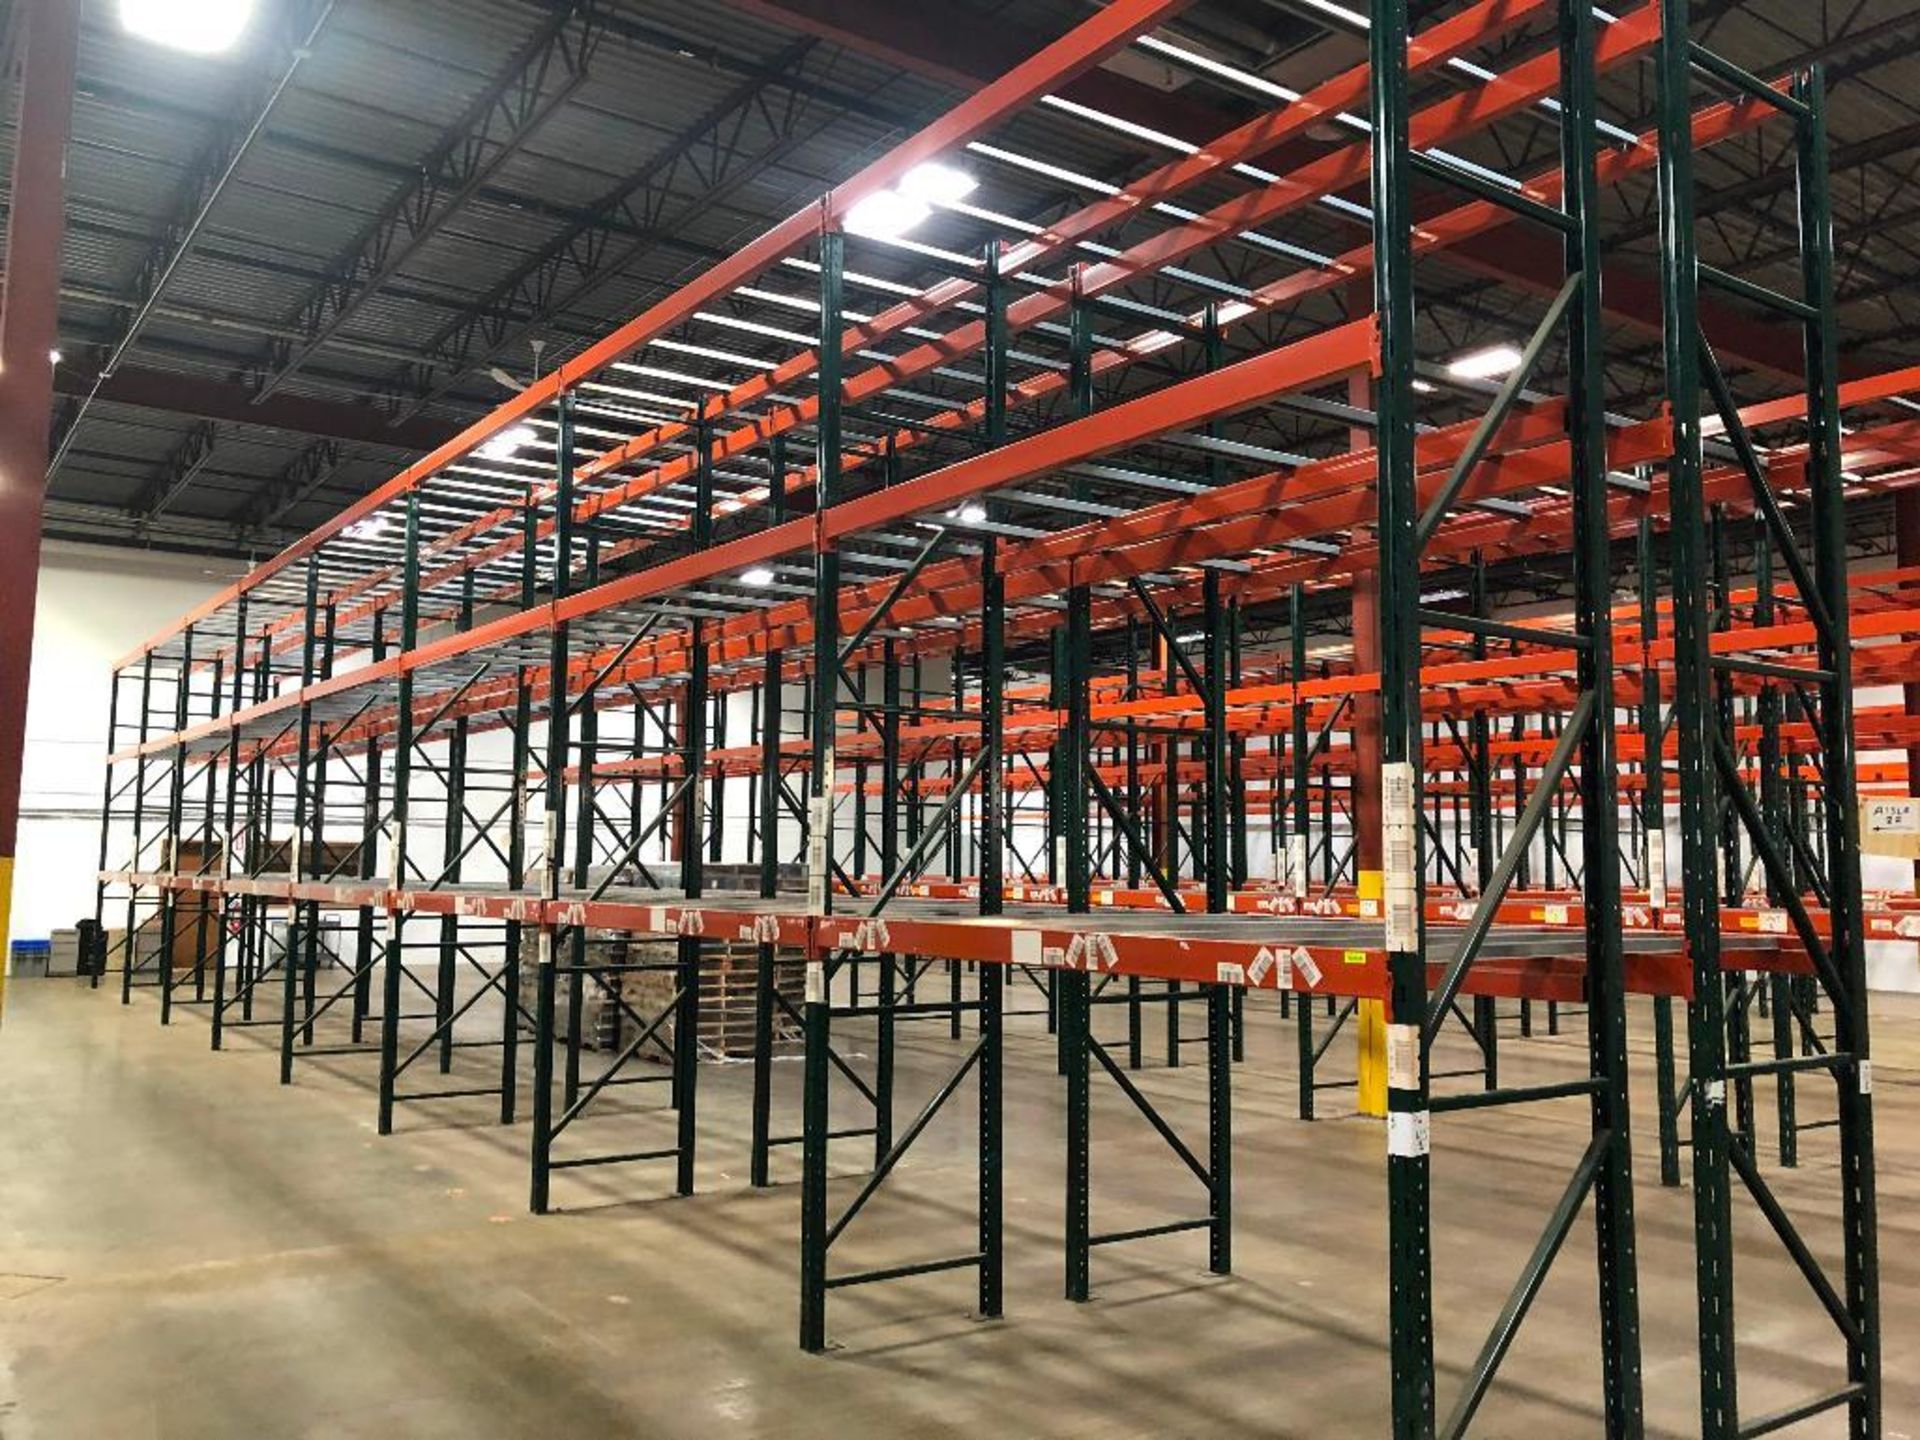 DESCRIPTION: (16) SECTIONS OF 9' X 3' X 15' PALLET RACKING ADDITIONAL INFORMATION: W/ (18) UPRIGHTS,